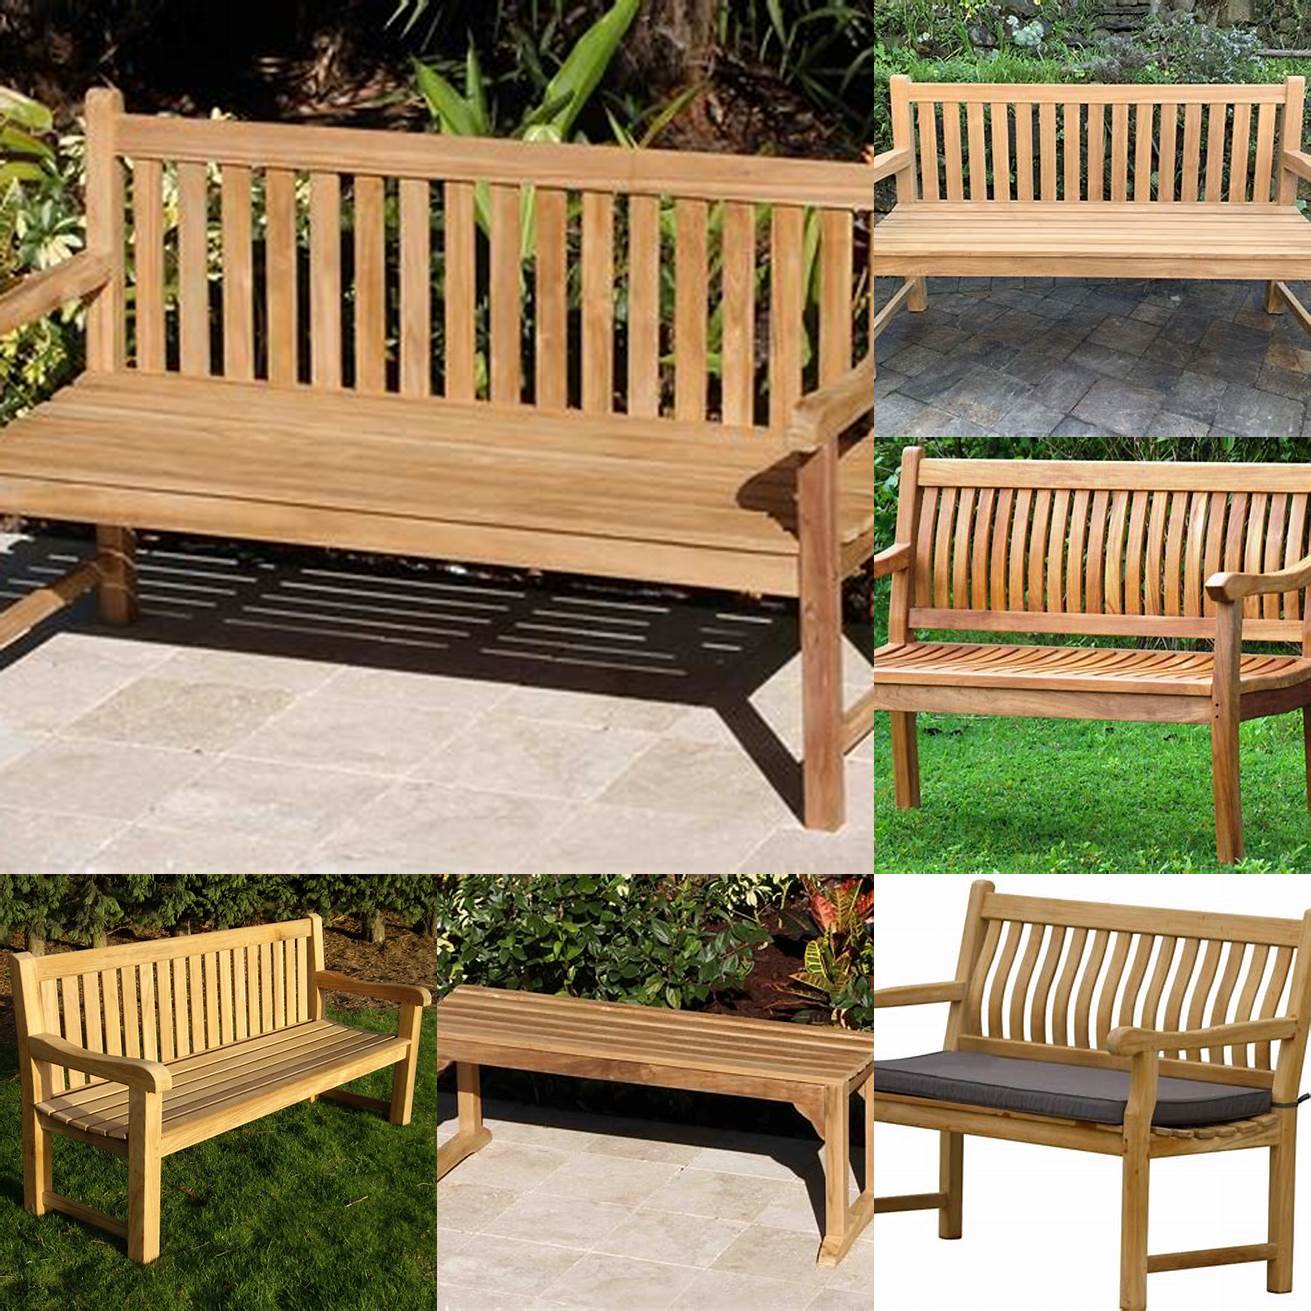 Incorporate a Teak Bench